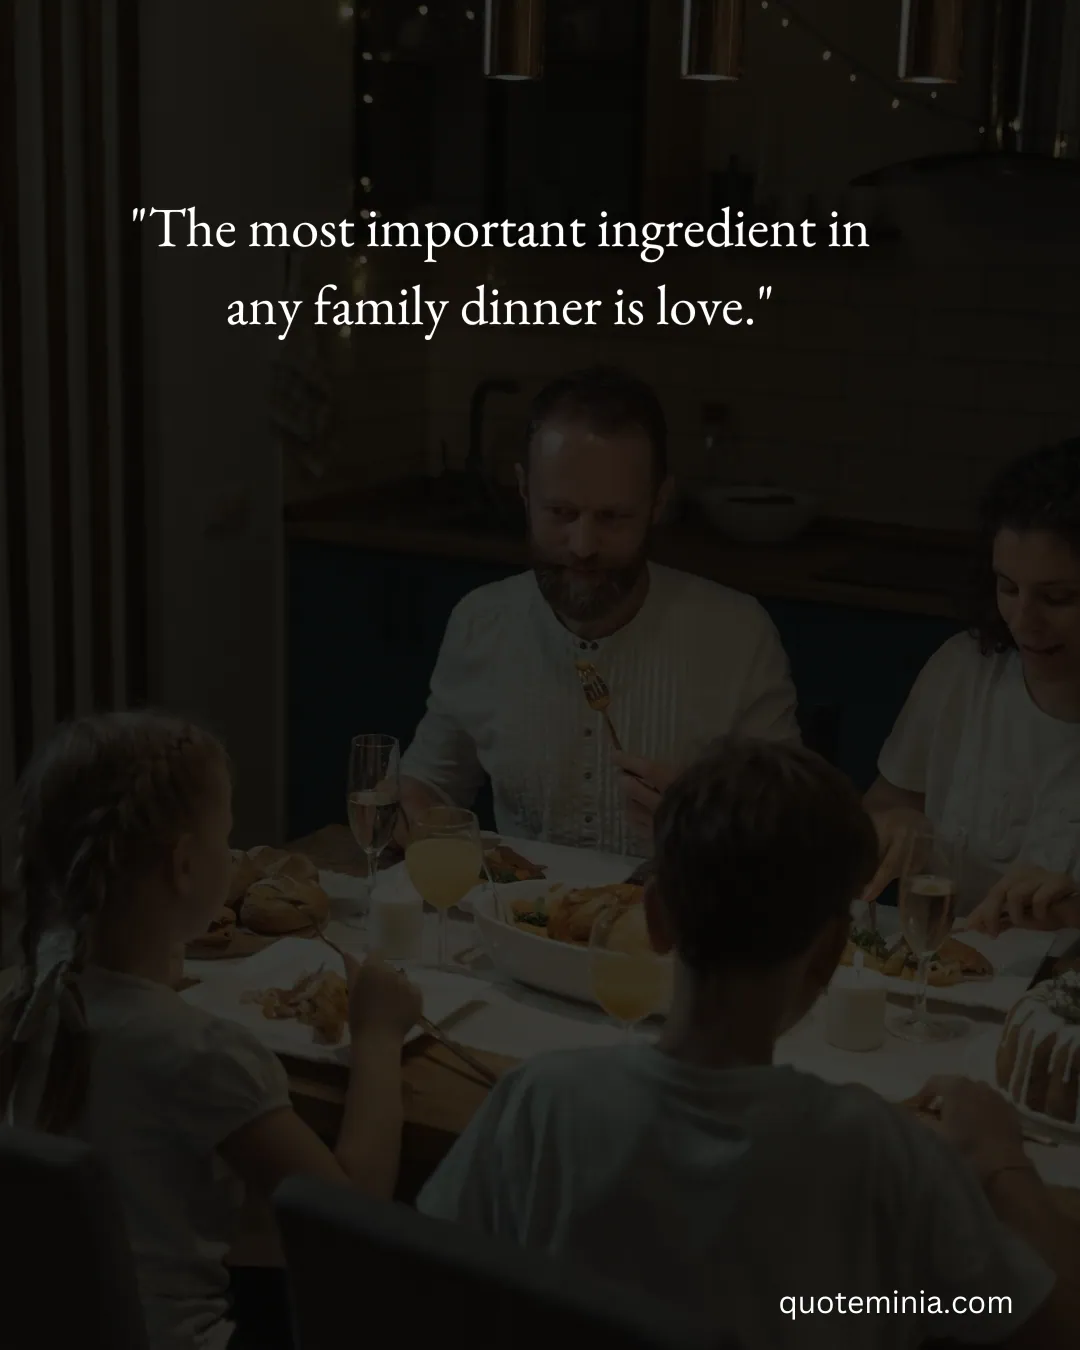 Quotes About Family Dinner 3